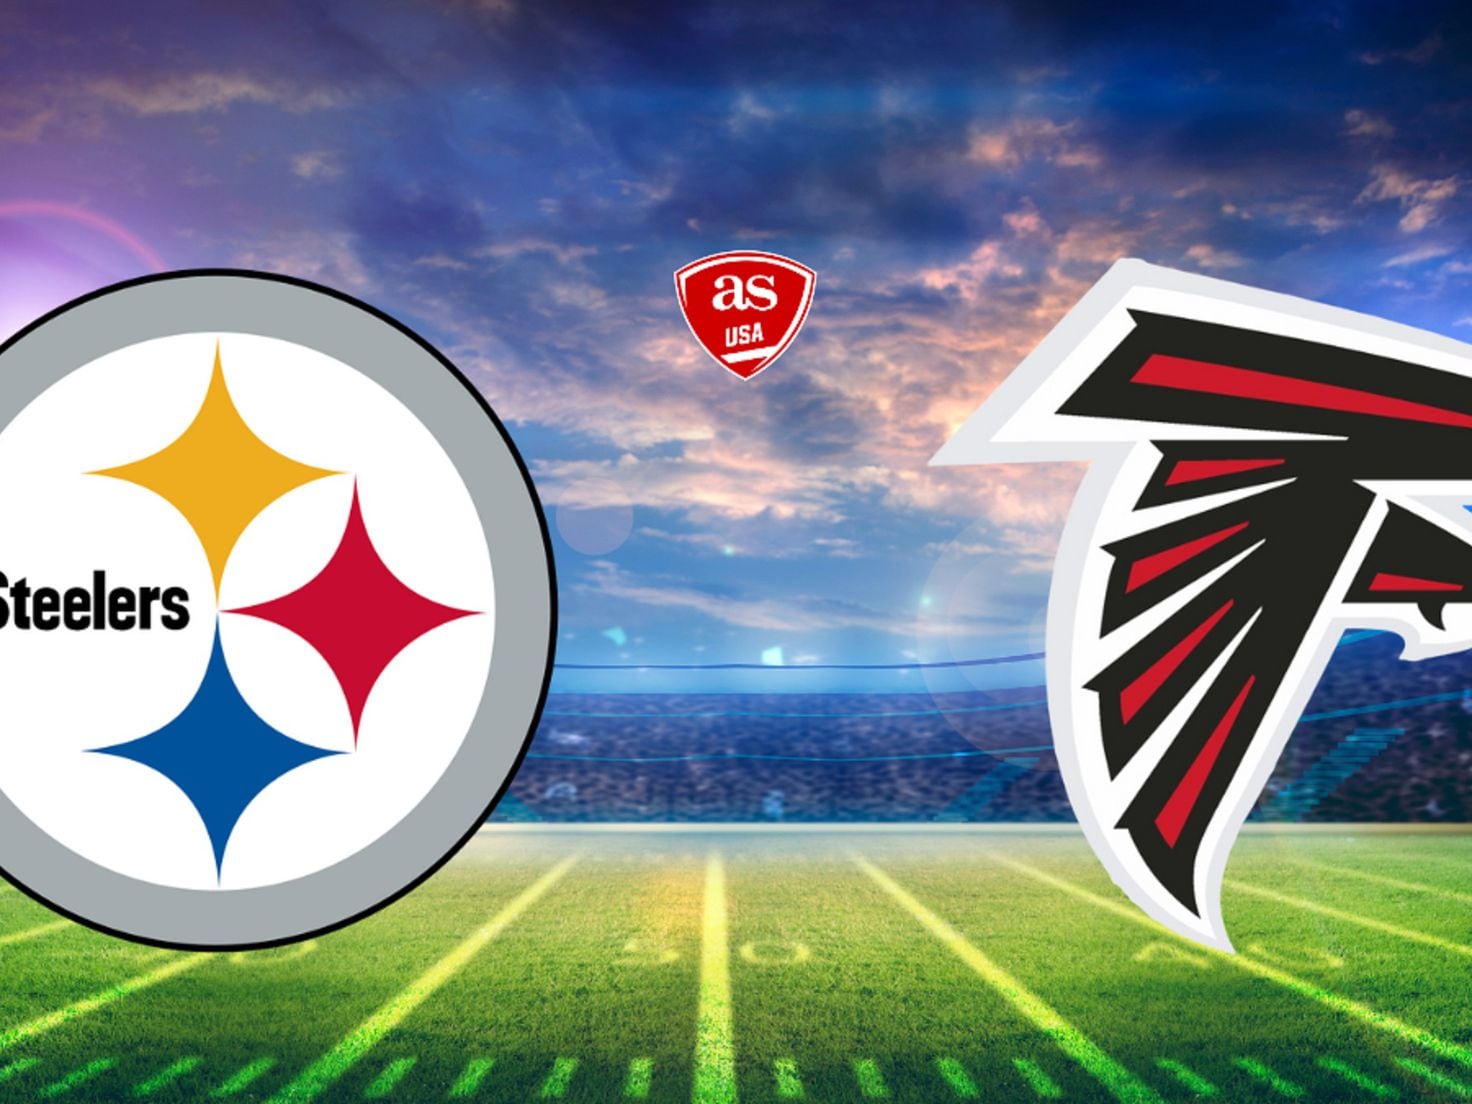 How to Watch Steelers vs Falcons: Live Stream and Game Predictions